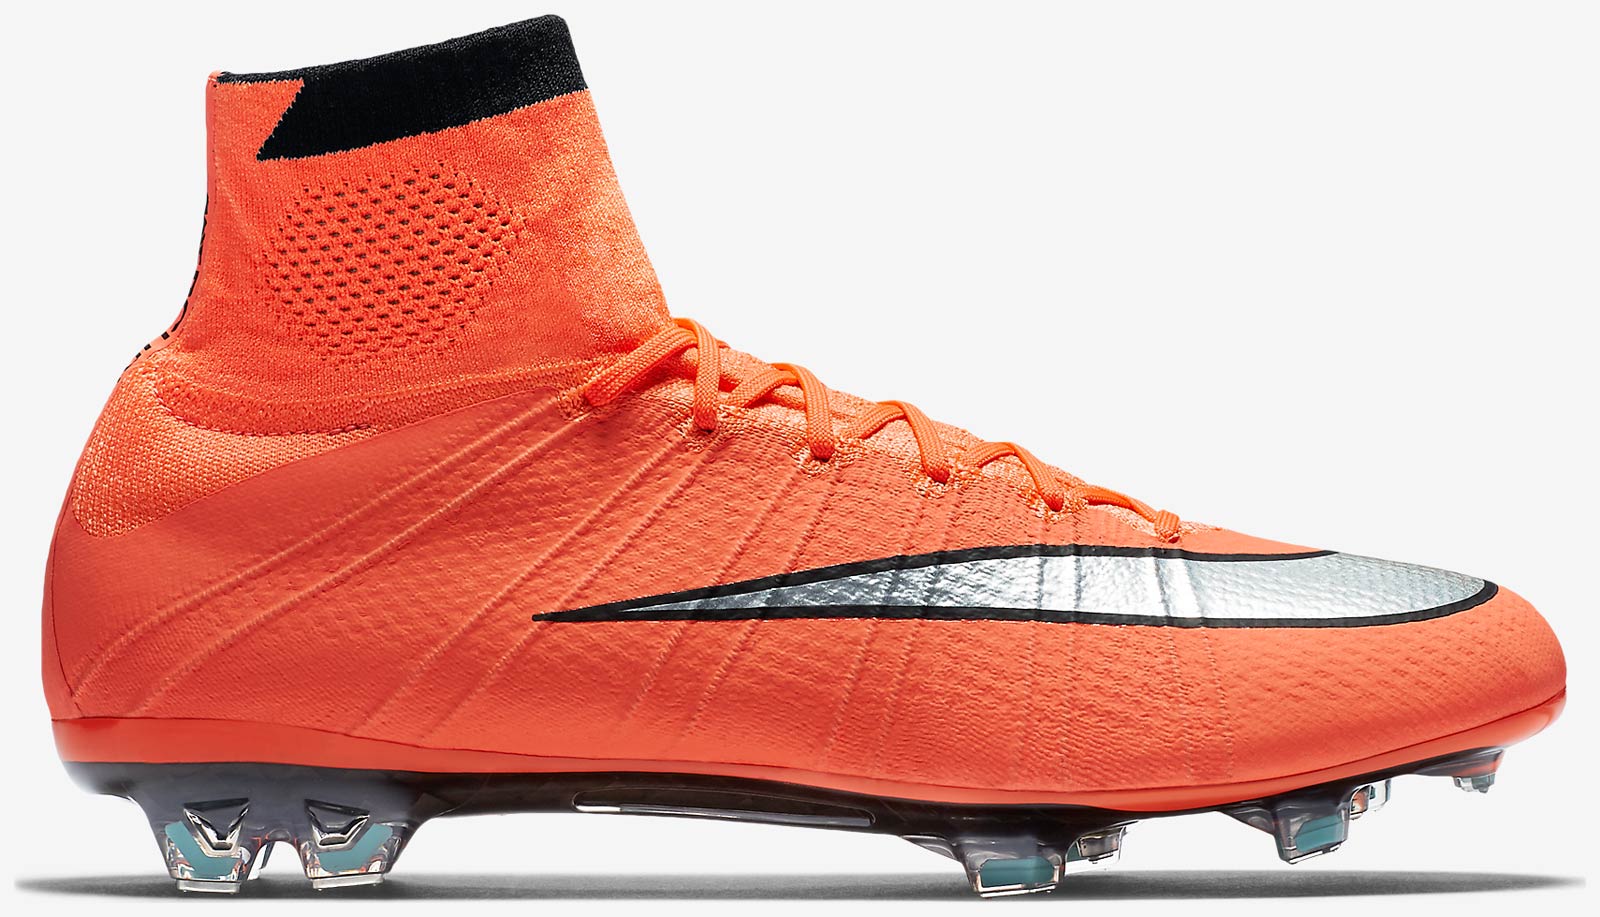 Bright Mango Nike Mercurial Superfly 2016 Football Boots Released ...